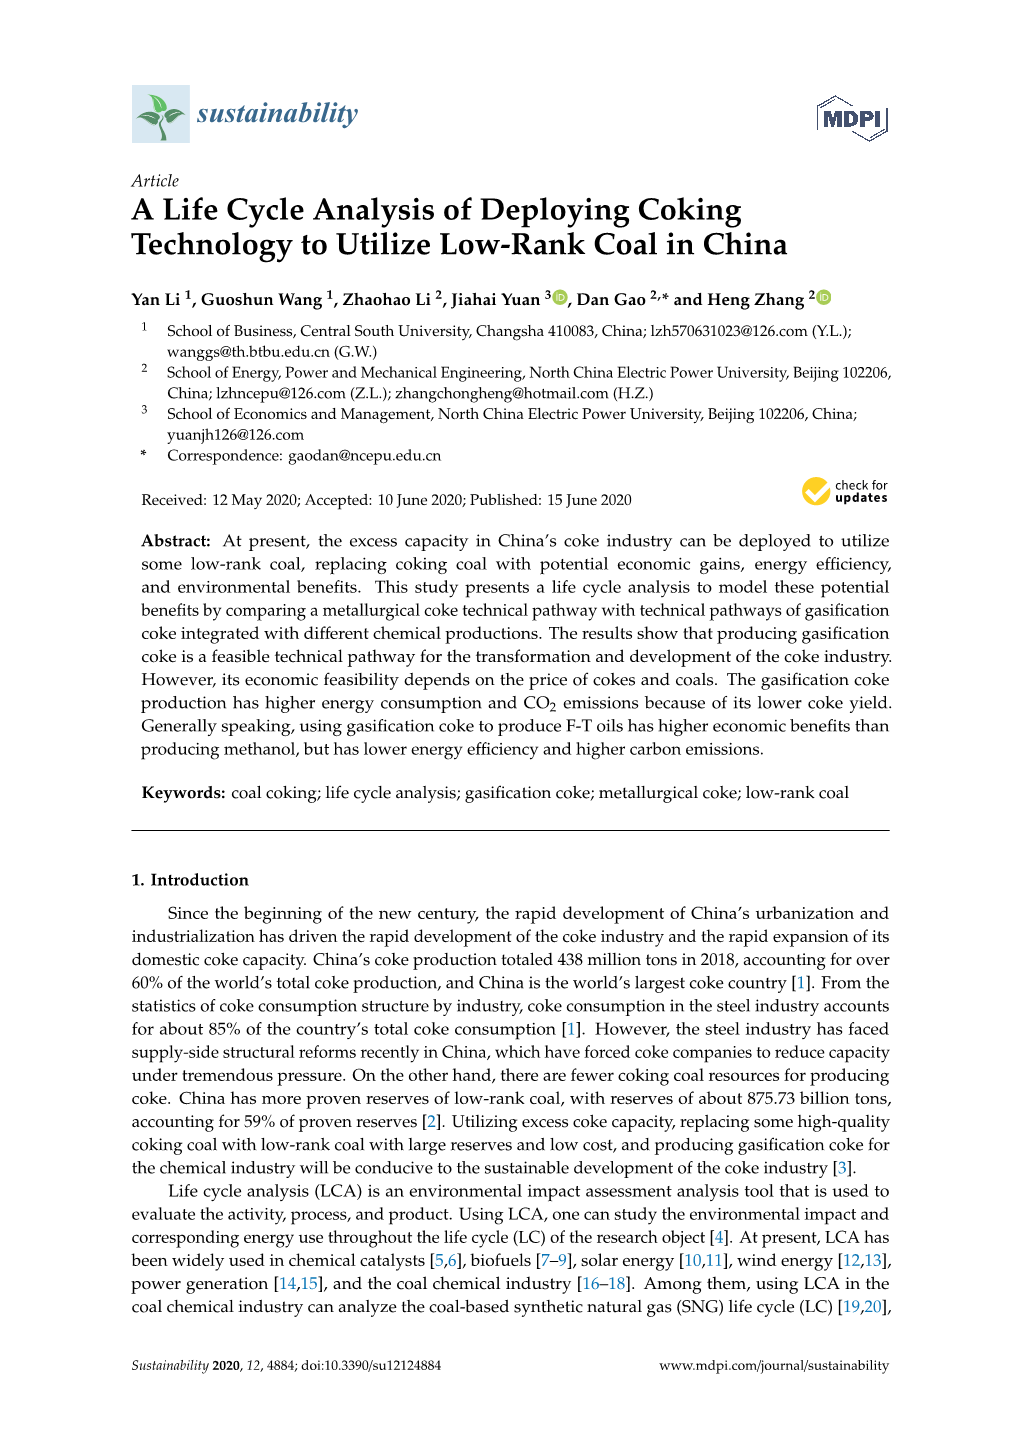 A Life Cycle Analysis of Deploying Coking Technology to Utilize Low-Rank Coal in China